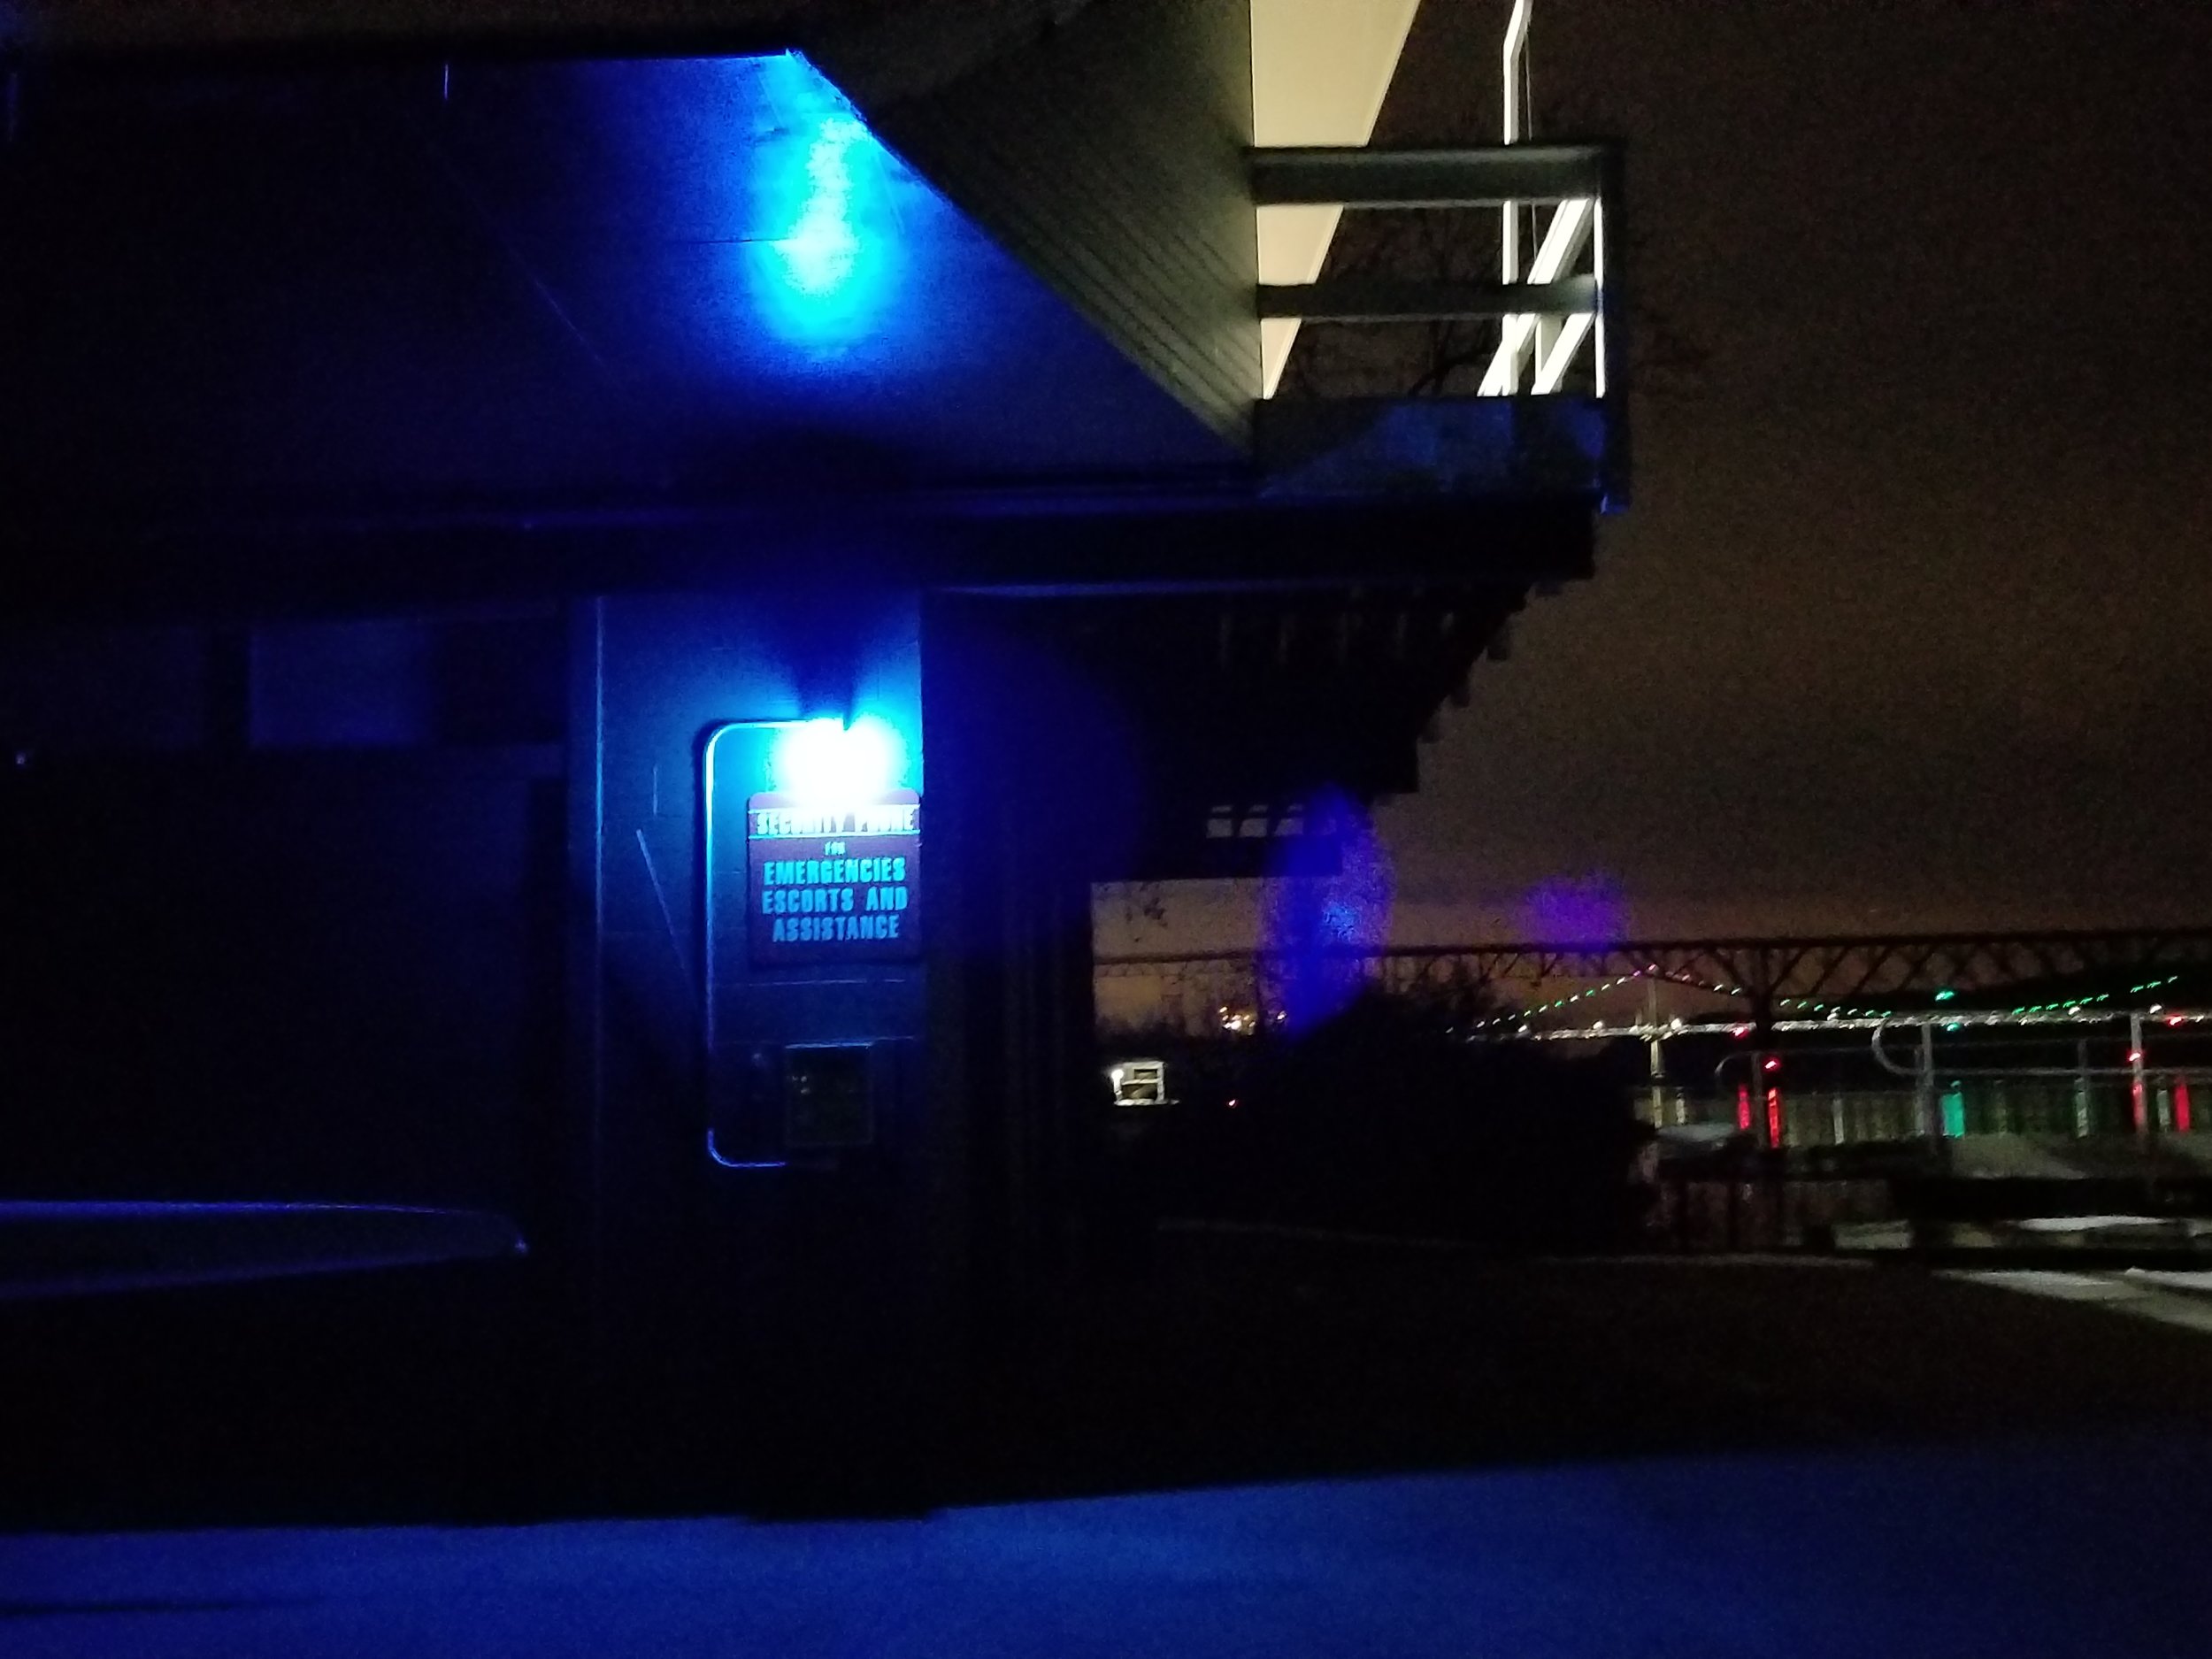 The callbox is not visible in its own blue-light and darkness.